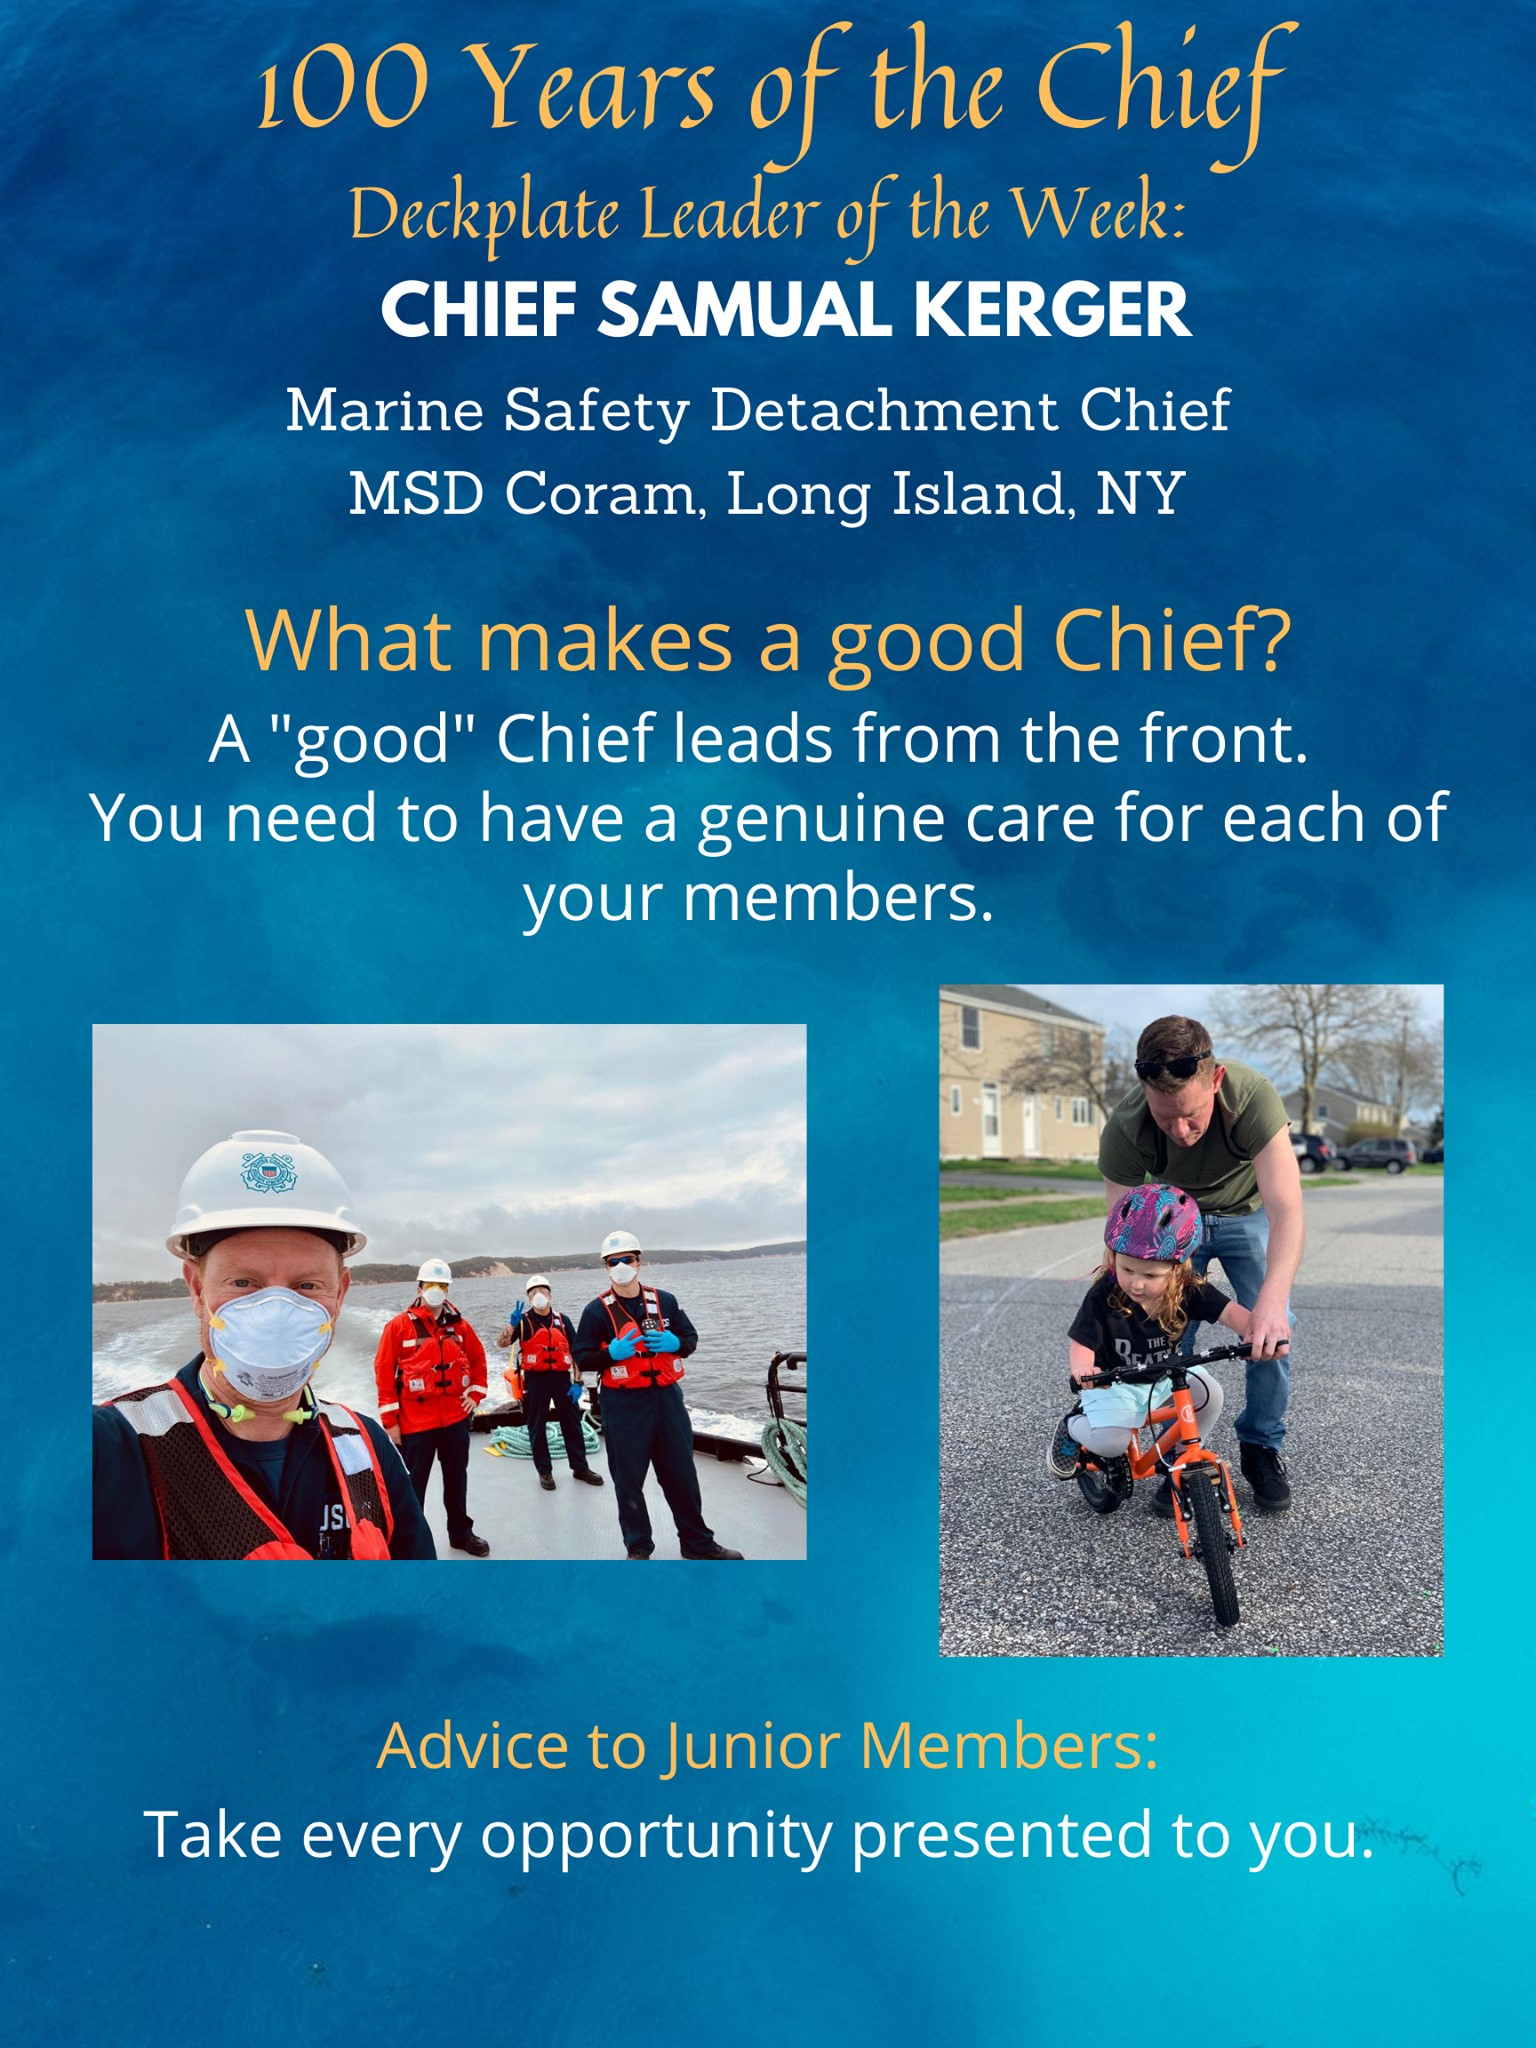 What makes a good Chief? A "good" Chief leads from the front. You need to have a genuine care for each of your members. 